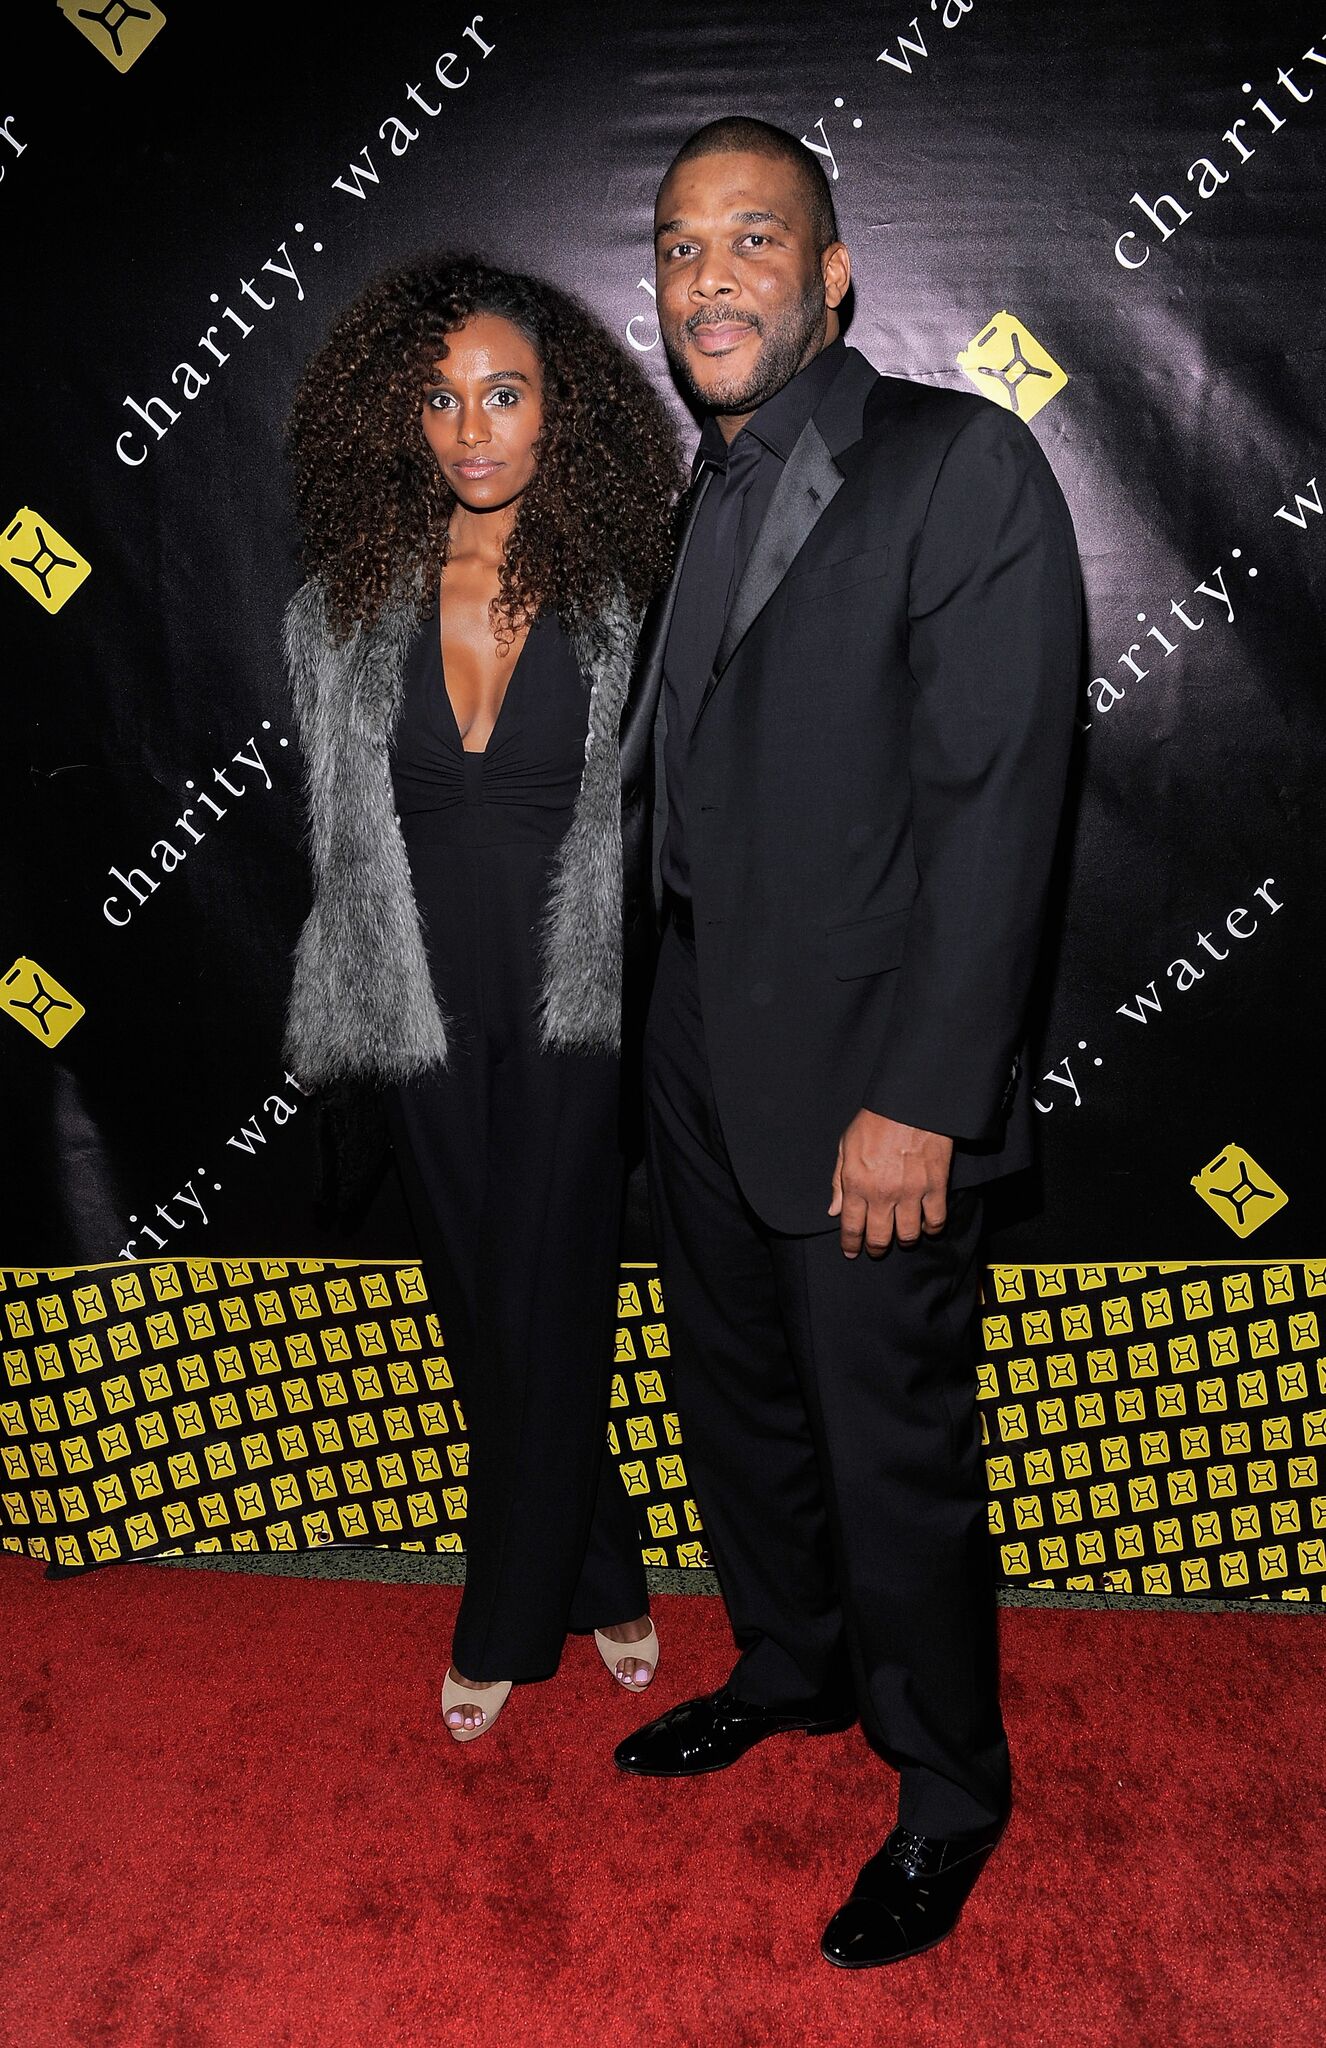 Model Gelila Bekele and writer/director Tyler Perry pose for a photo at the 6th Annual Charity: Ball at the 69th Regiment Armory | Photo: Getty Images